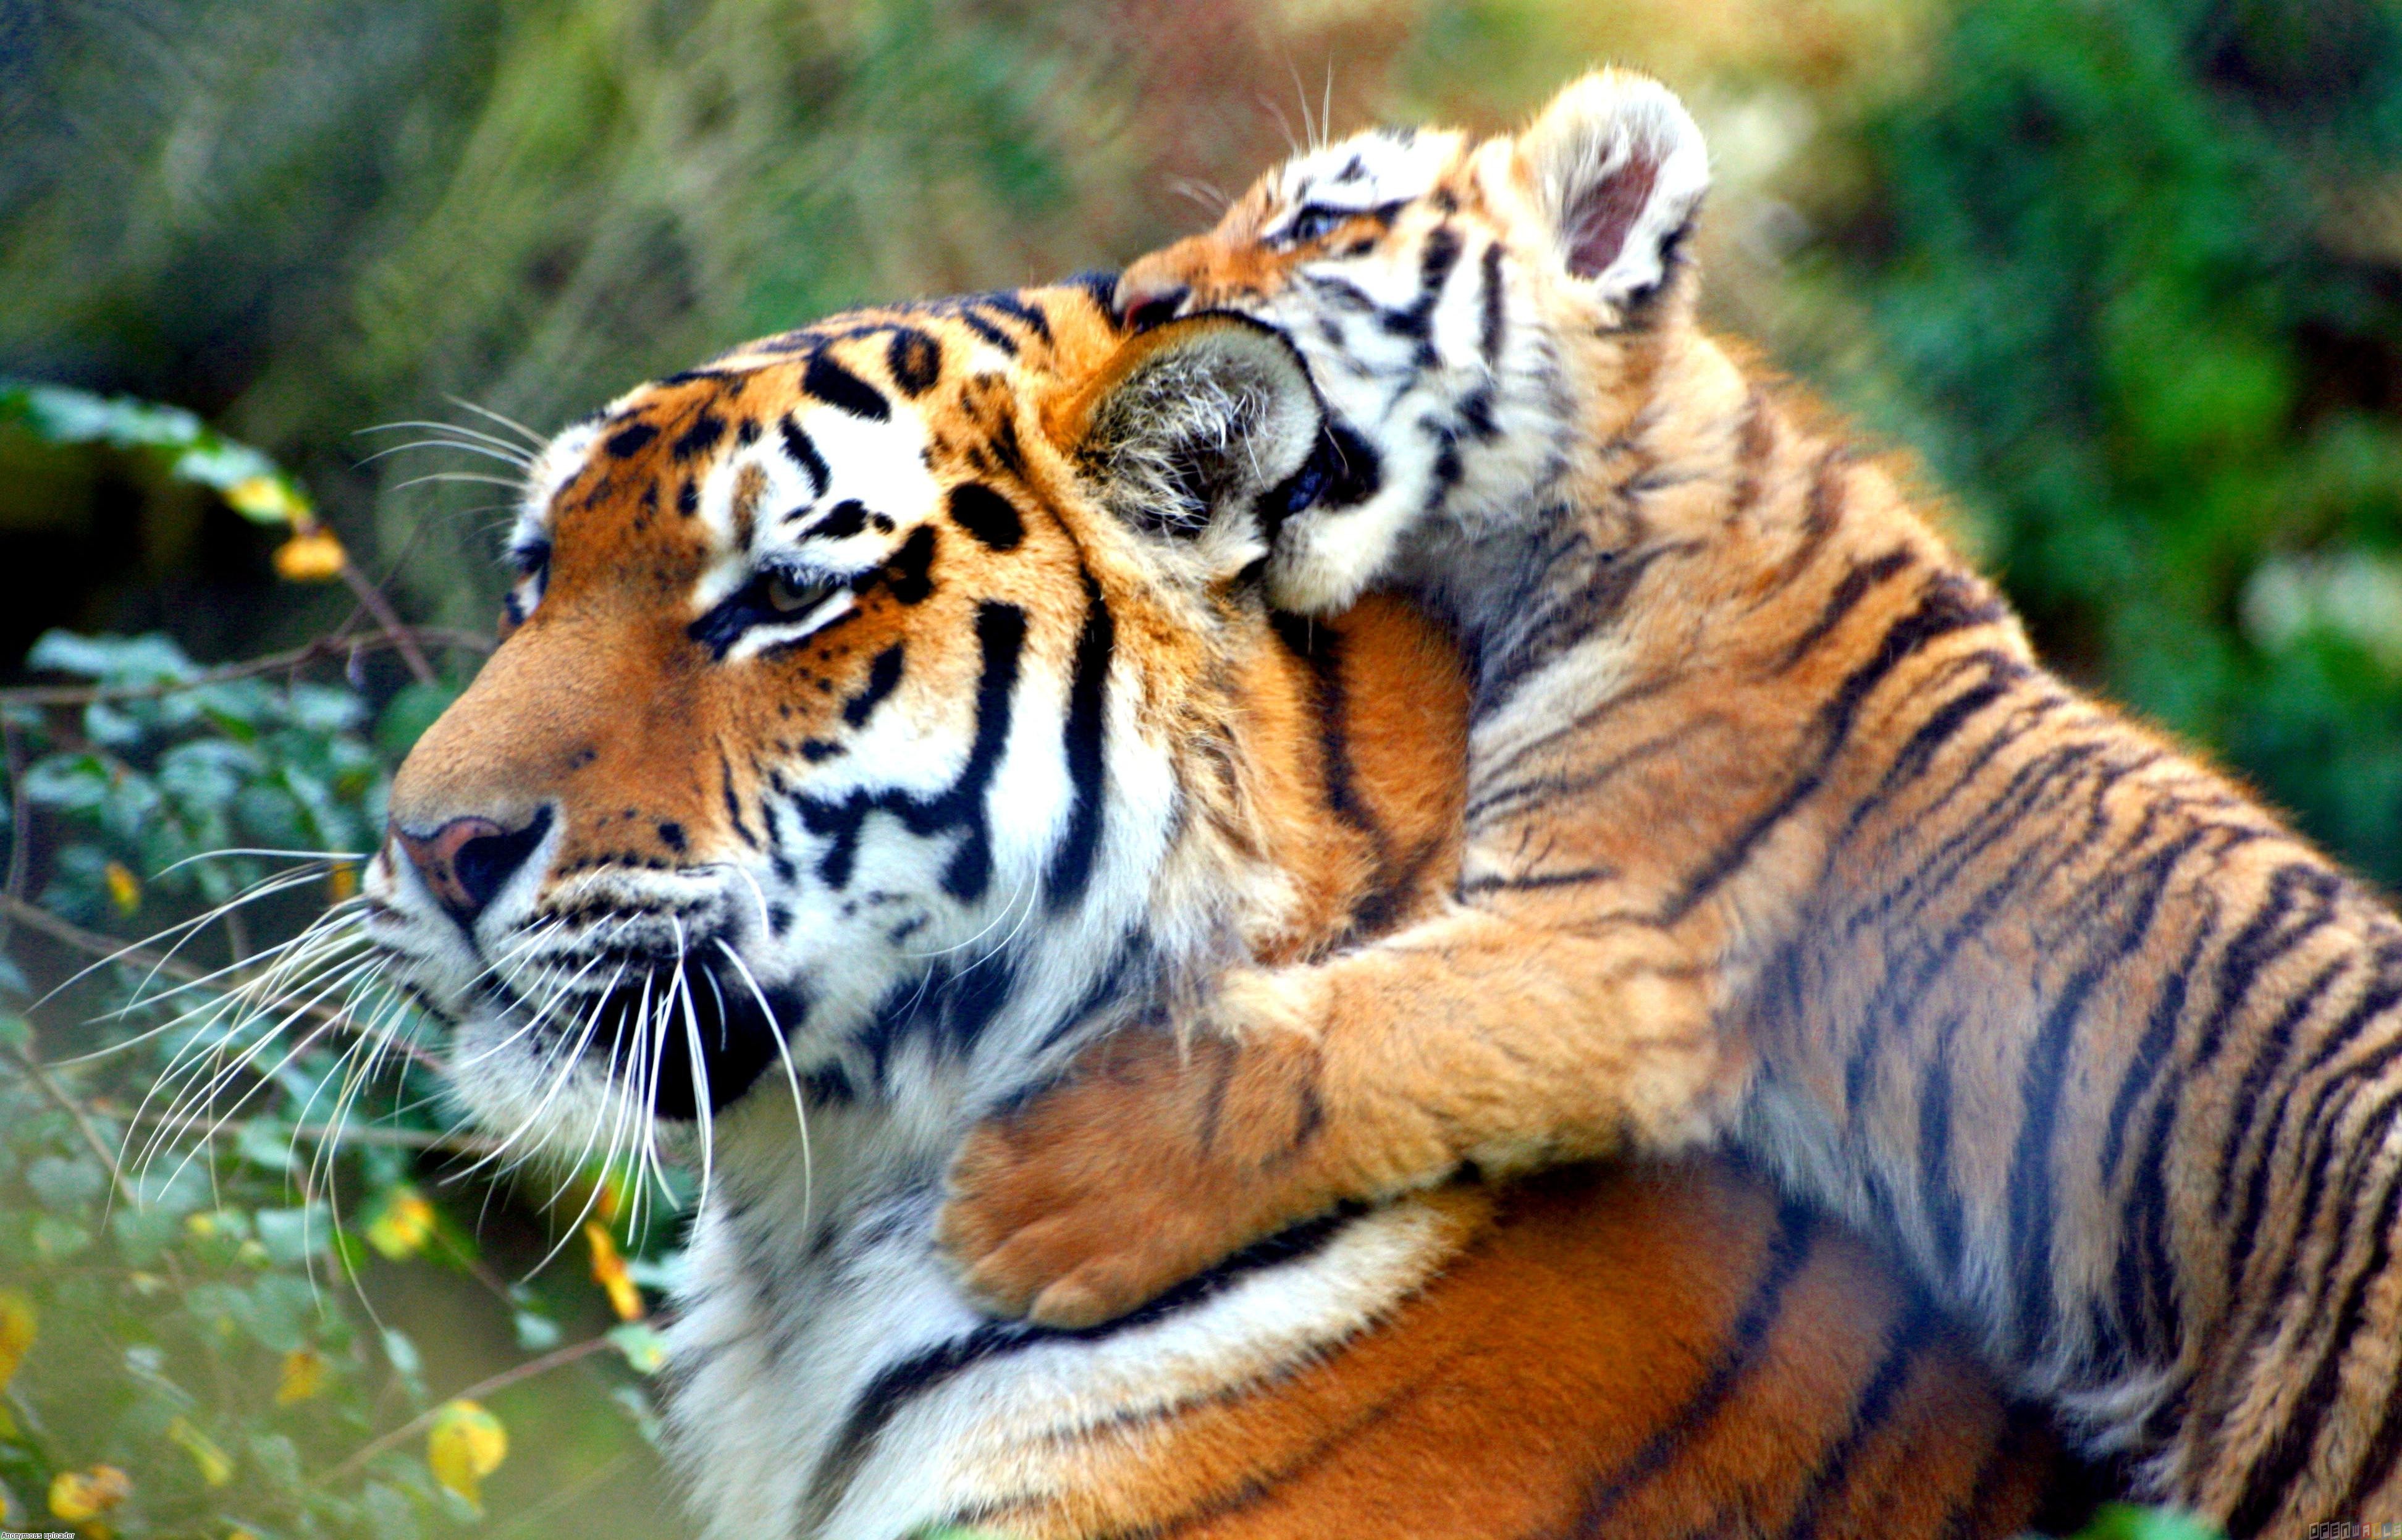 Tiger with her cub wallpaper #11659 - Open Walls